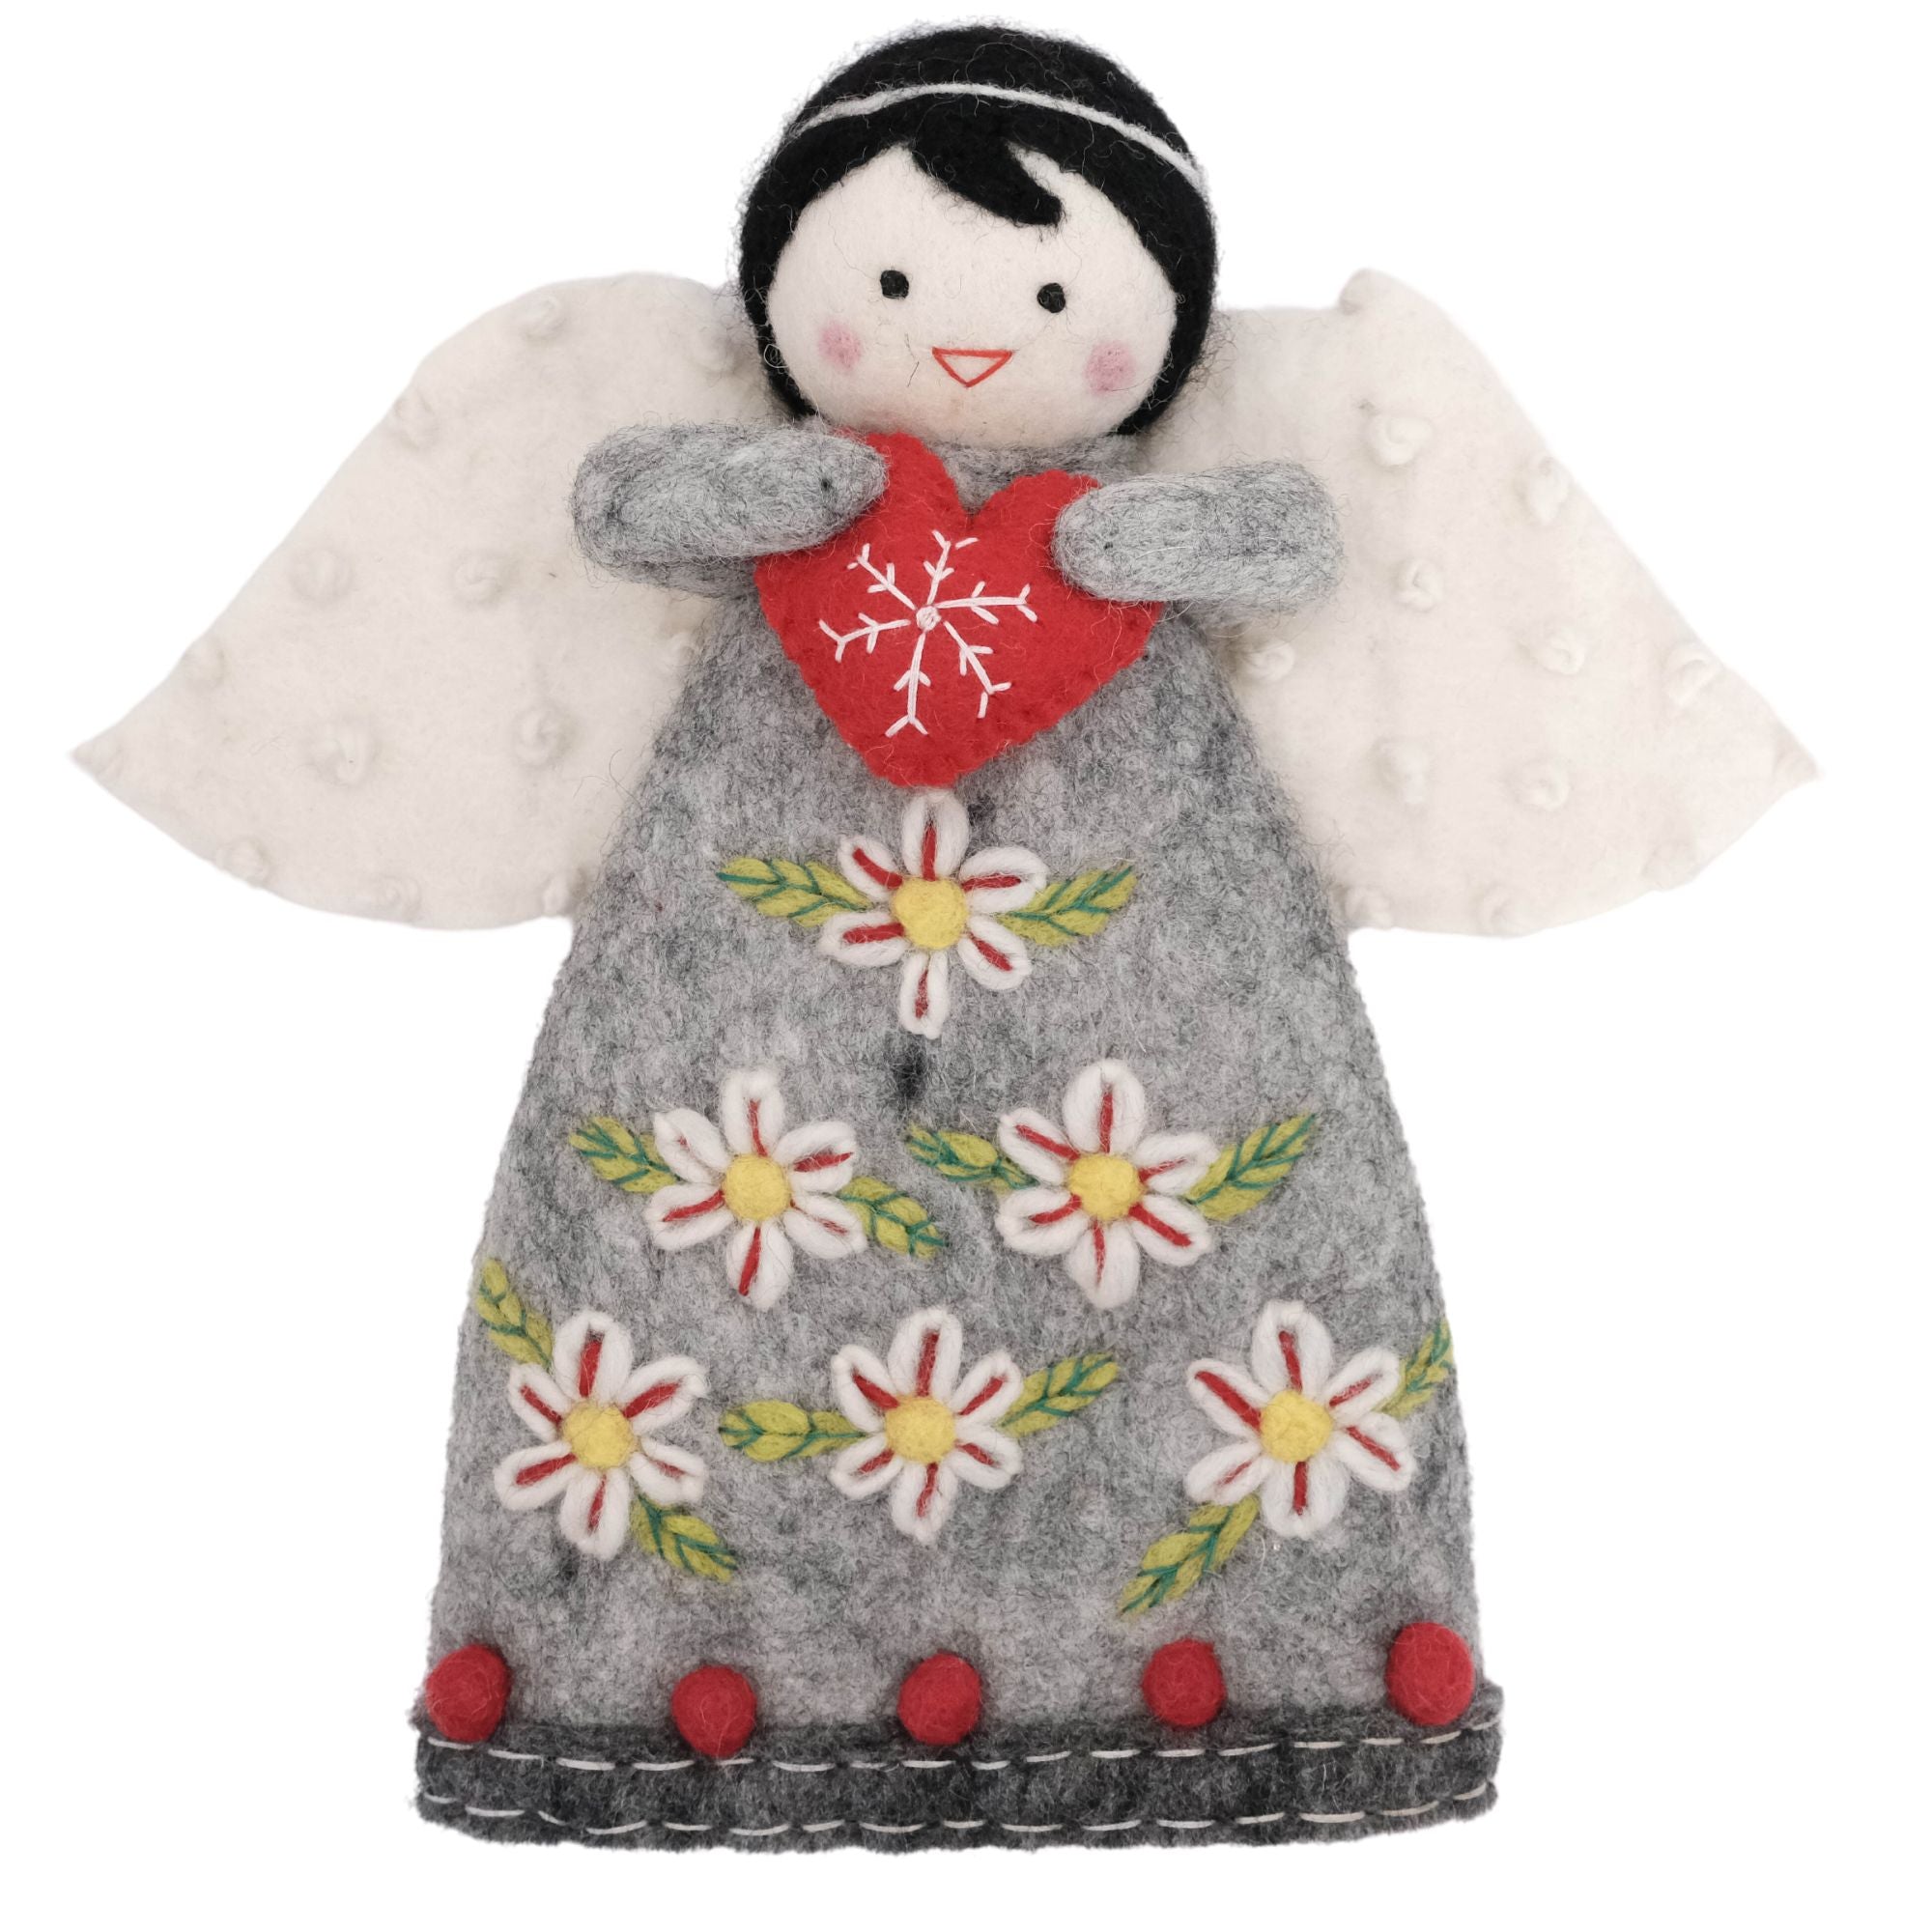 Christmas Tree Topper or Tabletop Decor, Angel Topper Grey - 10 inch Tall